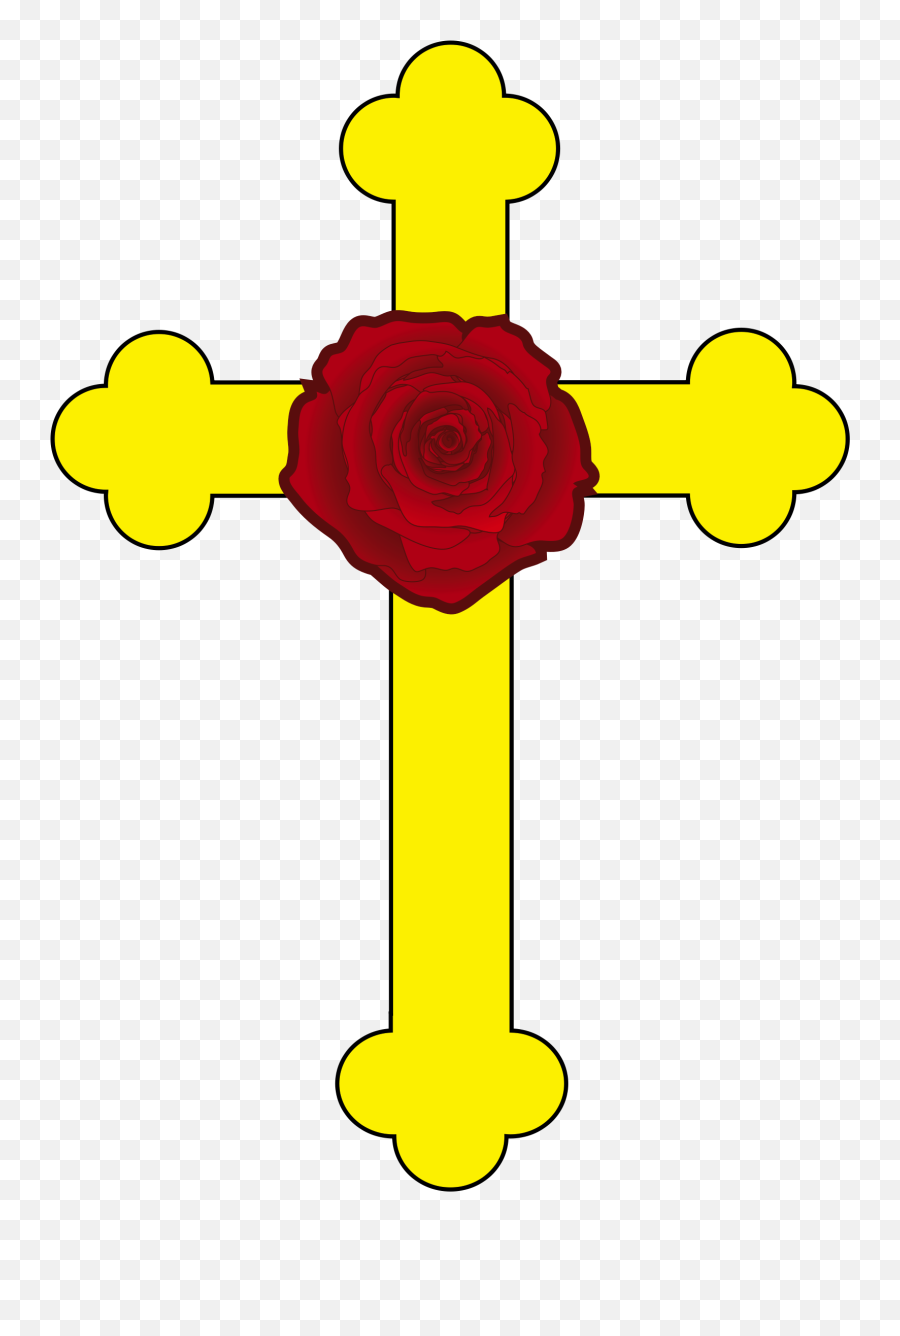 What Is The Meaning Of The Symbol Of A Circle With A Plus - Rose Cross Emoji,Cross Emoji